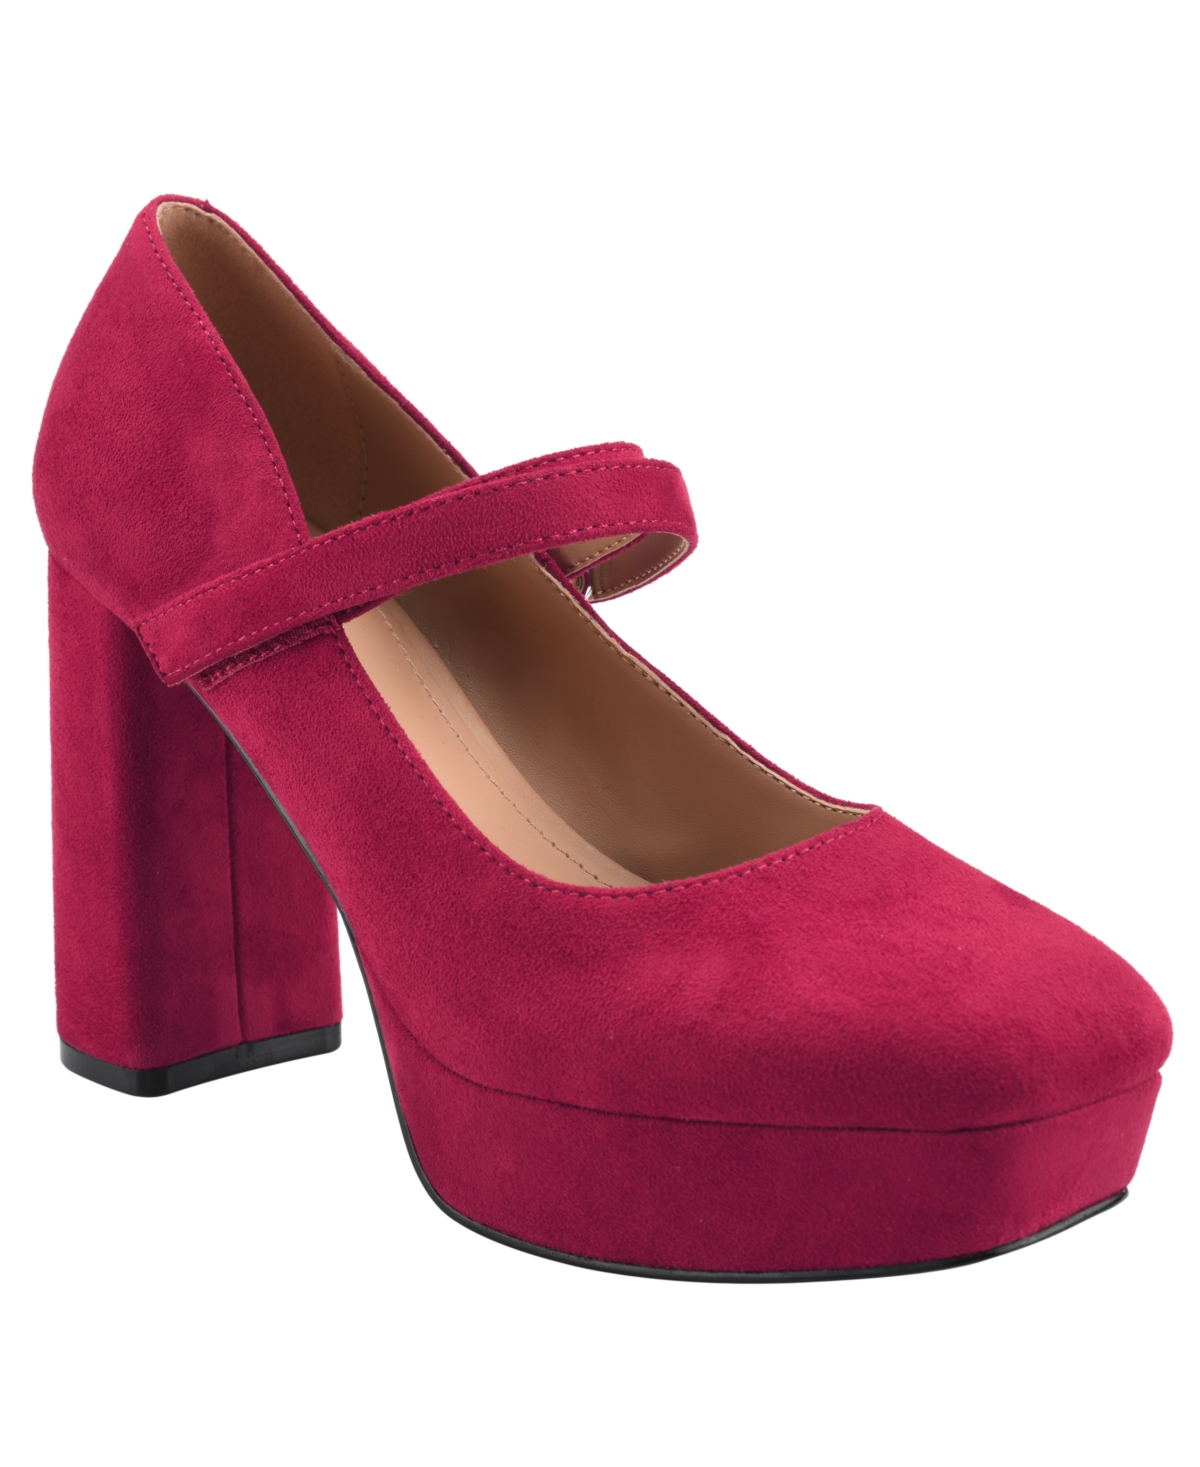 Women's Nicoly Dress Pumps - Red